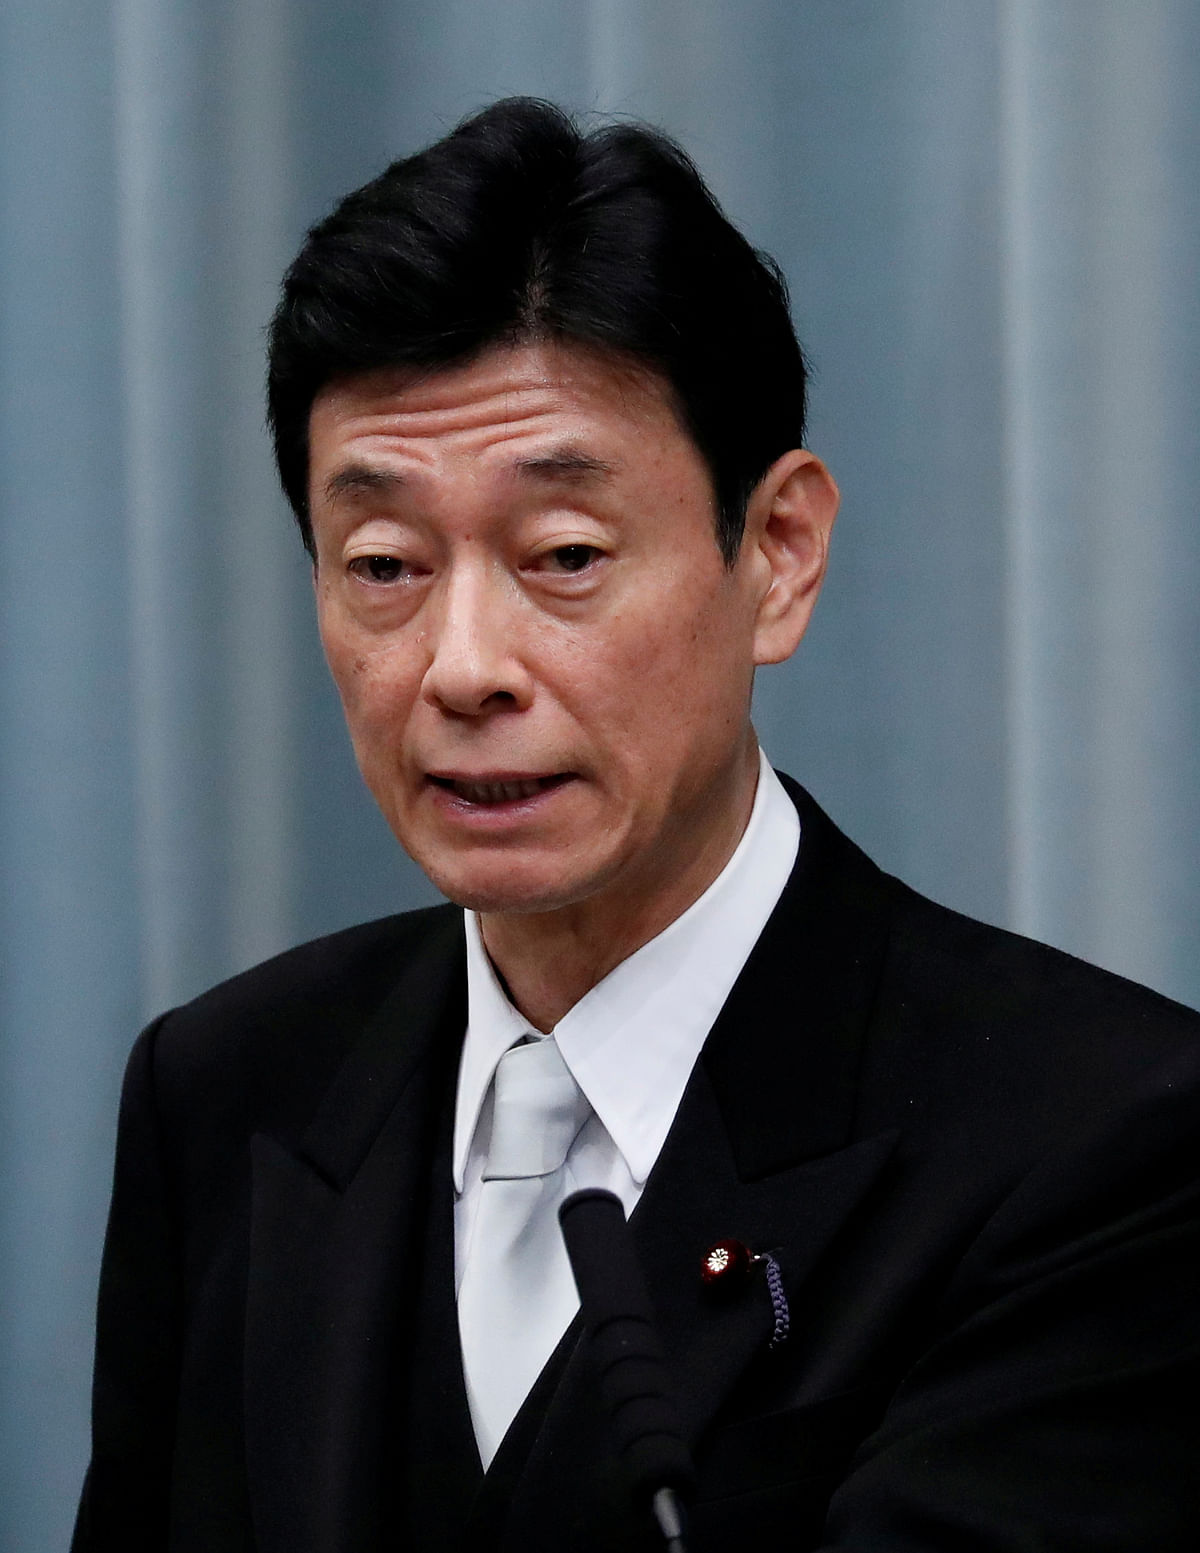 Japan's economy minister warns against premature fiscal, monetary steps to stimulate demand